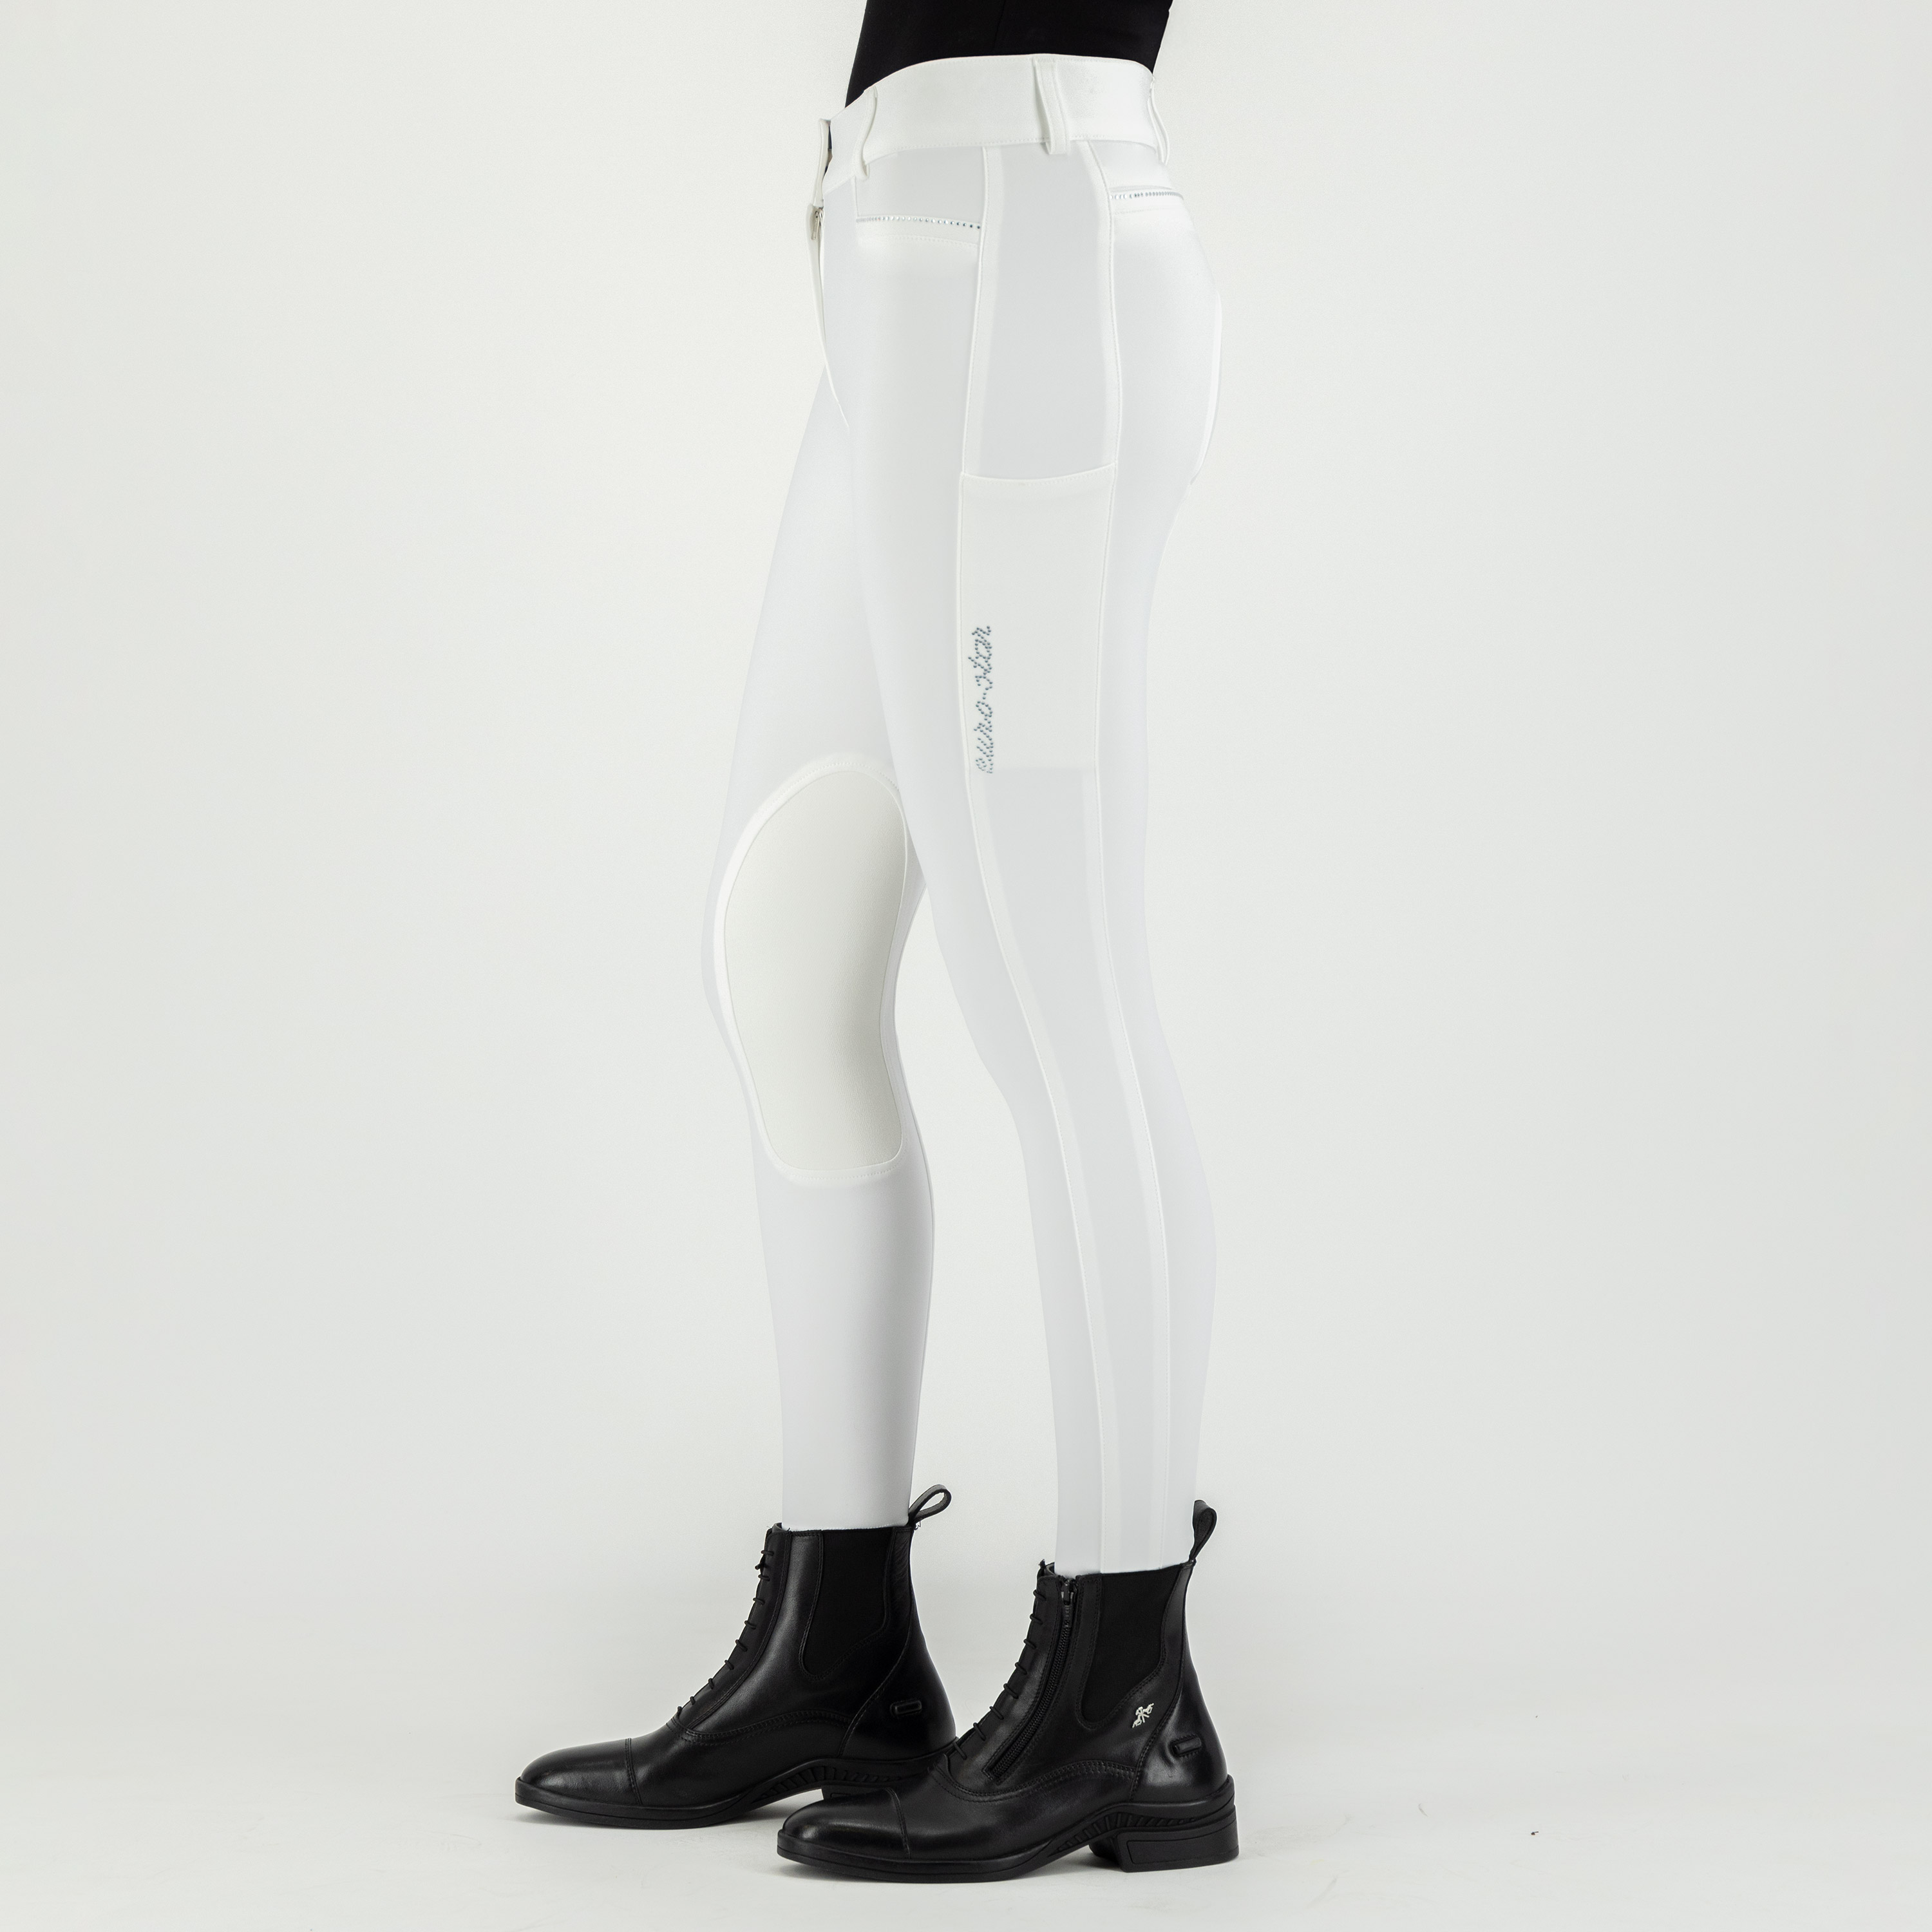 EURO-STAR Damen Reithose ARIELLE COMPETITION Grip Connect Knee